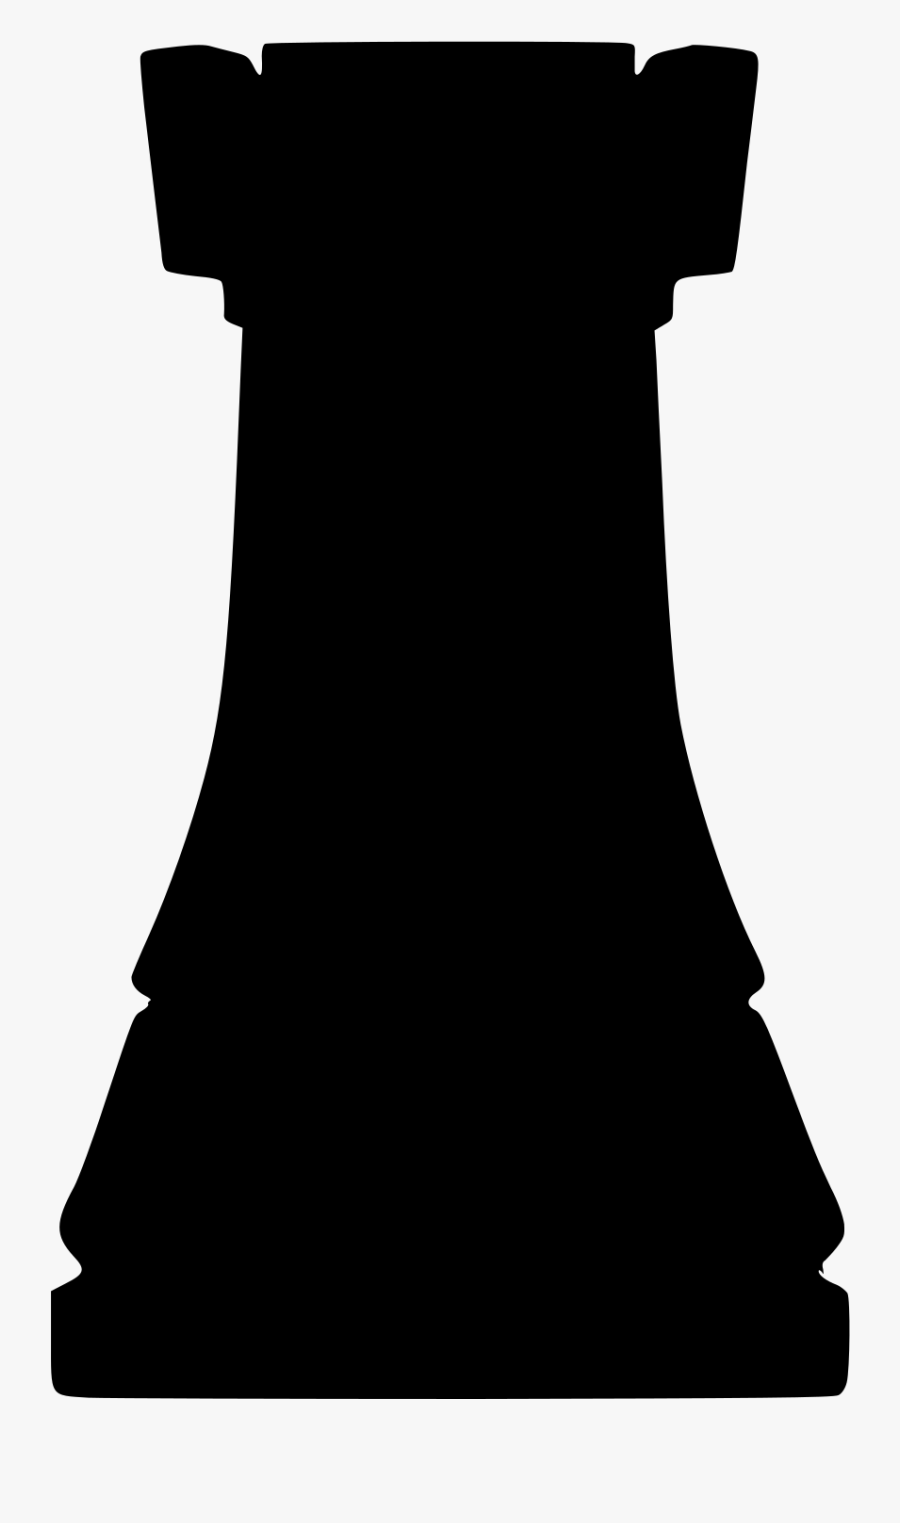 Dress Back View Filled - Costume Icon Png, Transparent Clipart